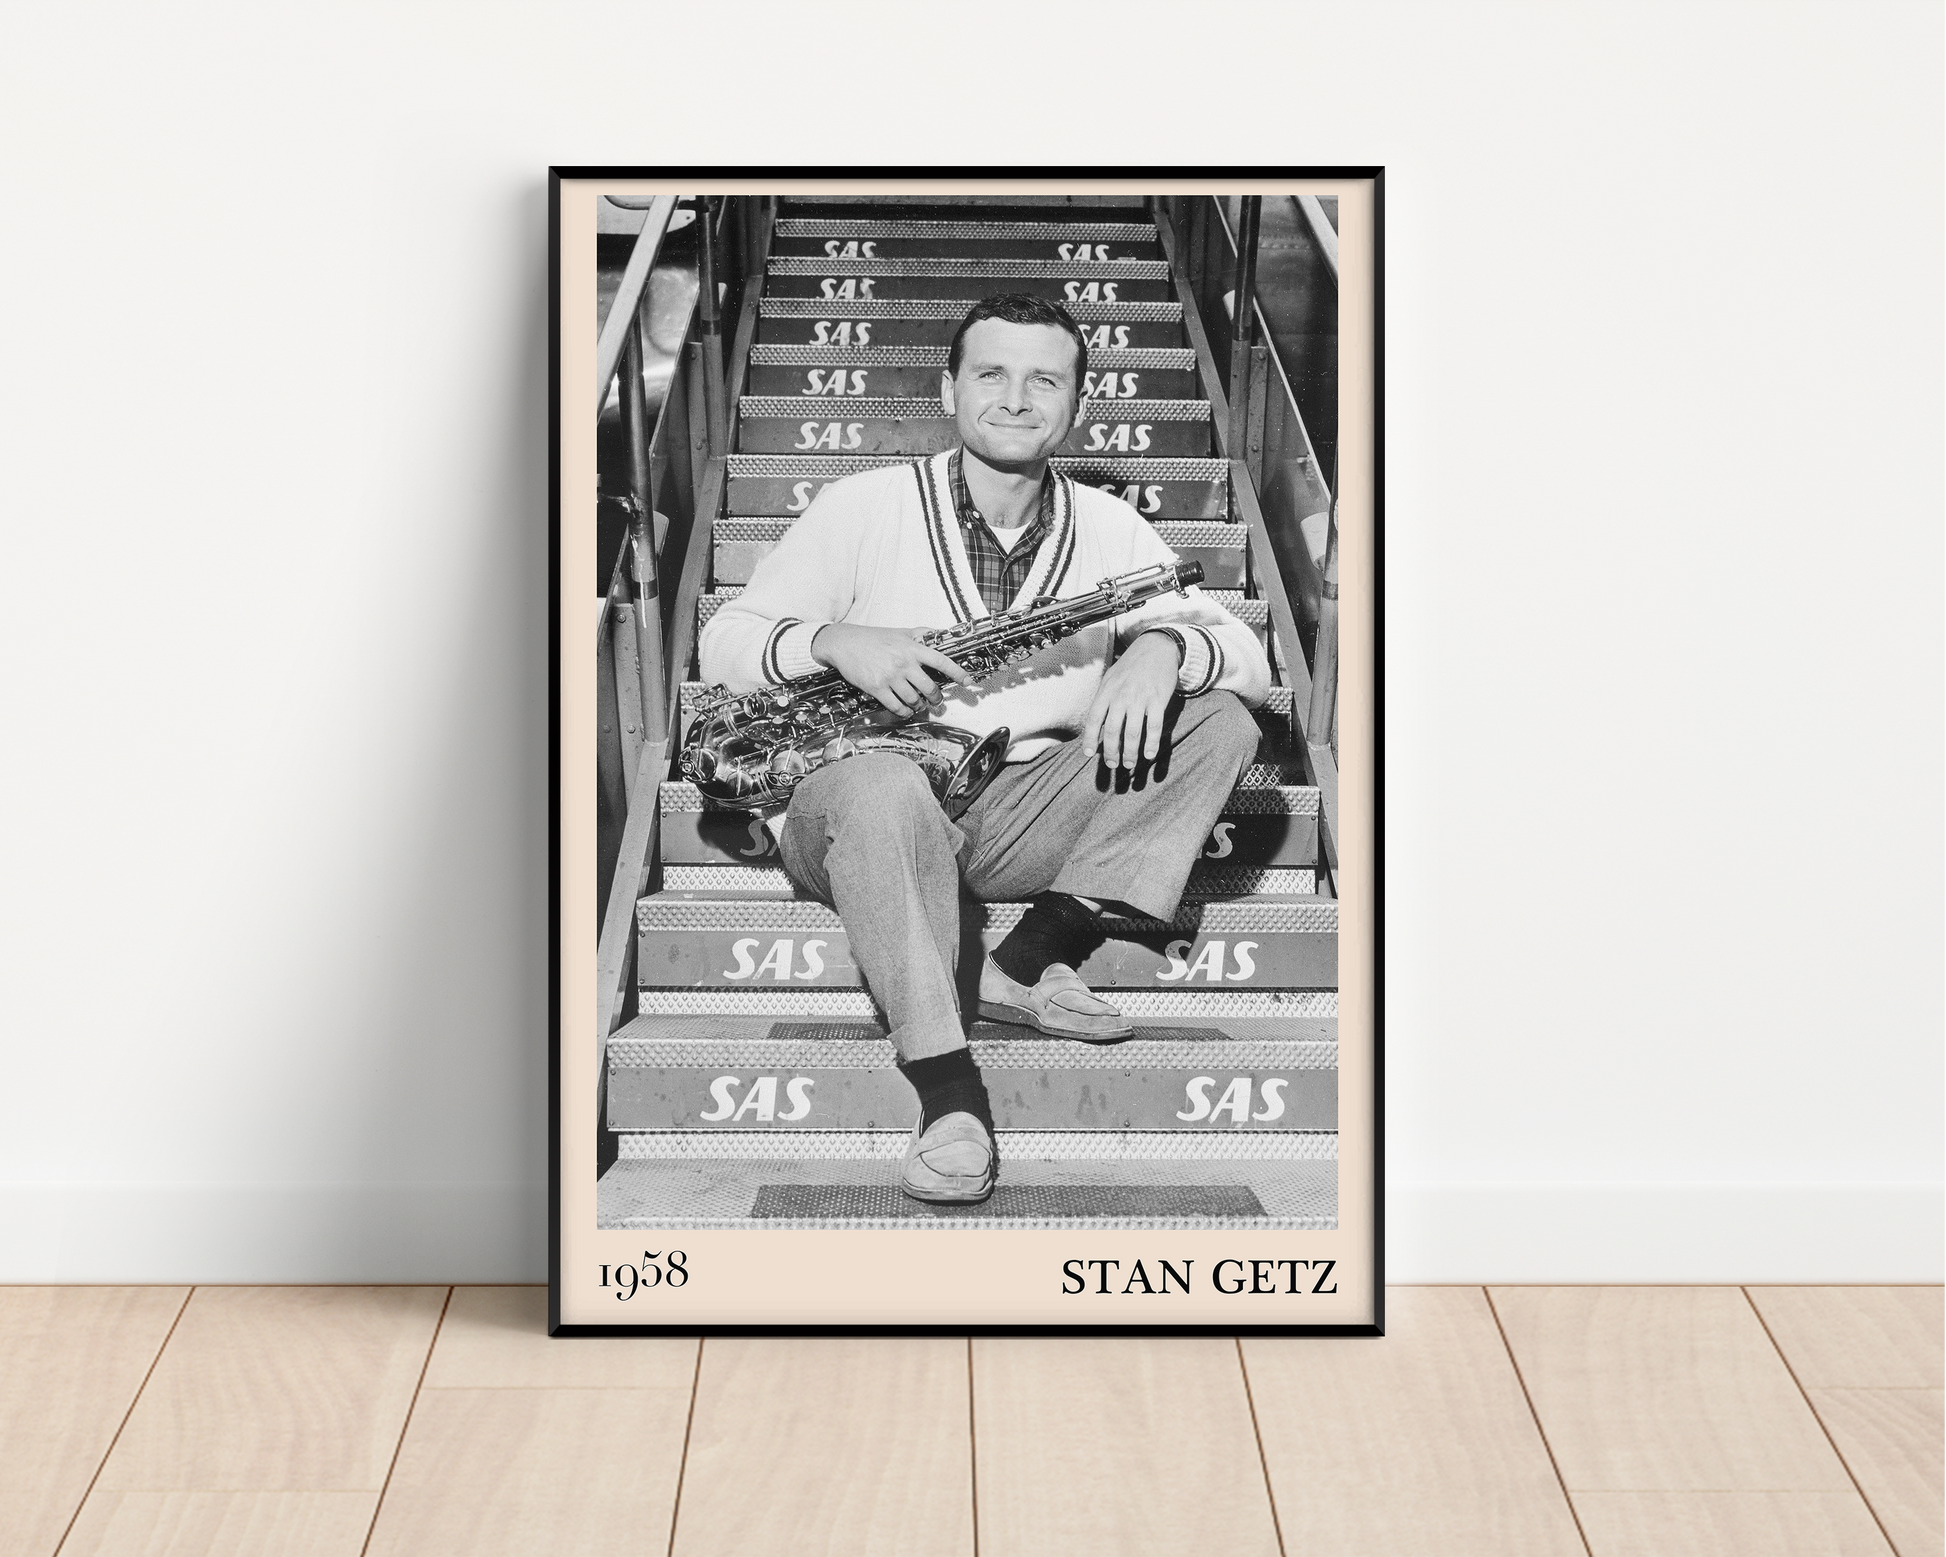 1958 picture of Stan Getz holding his saxophone. Picture crafted into a black framed poster, with an off-white border. Poster is propped against a white wall